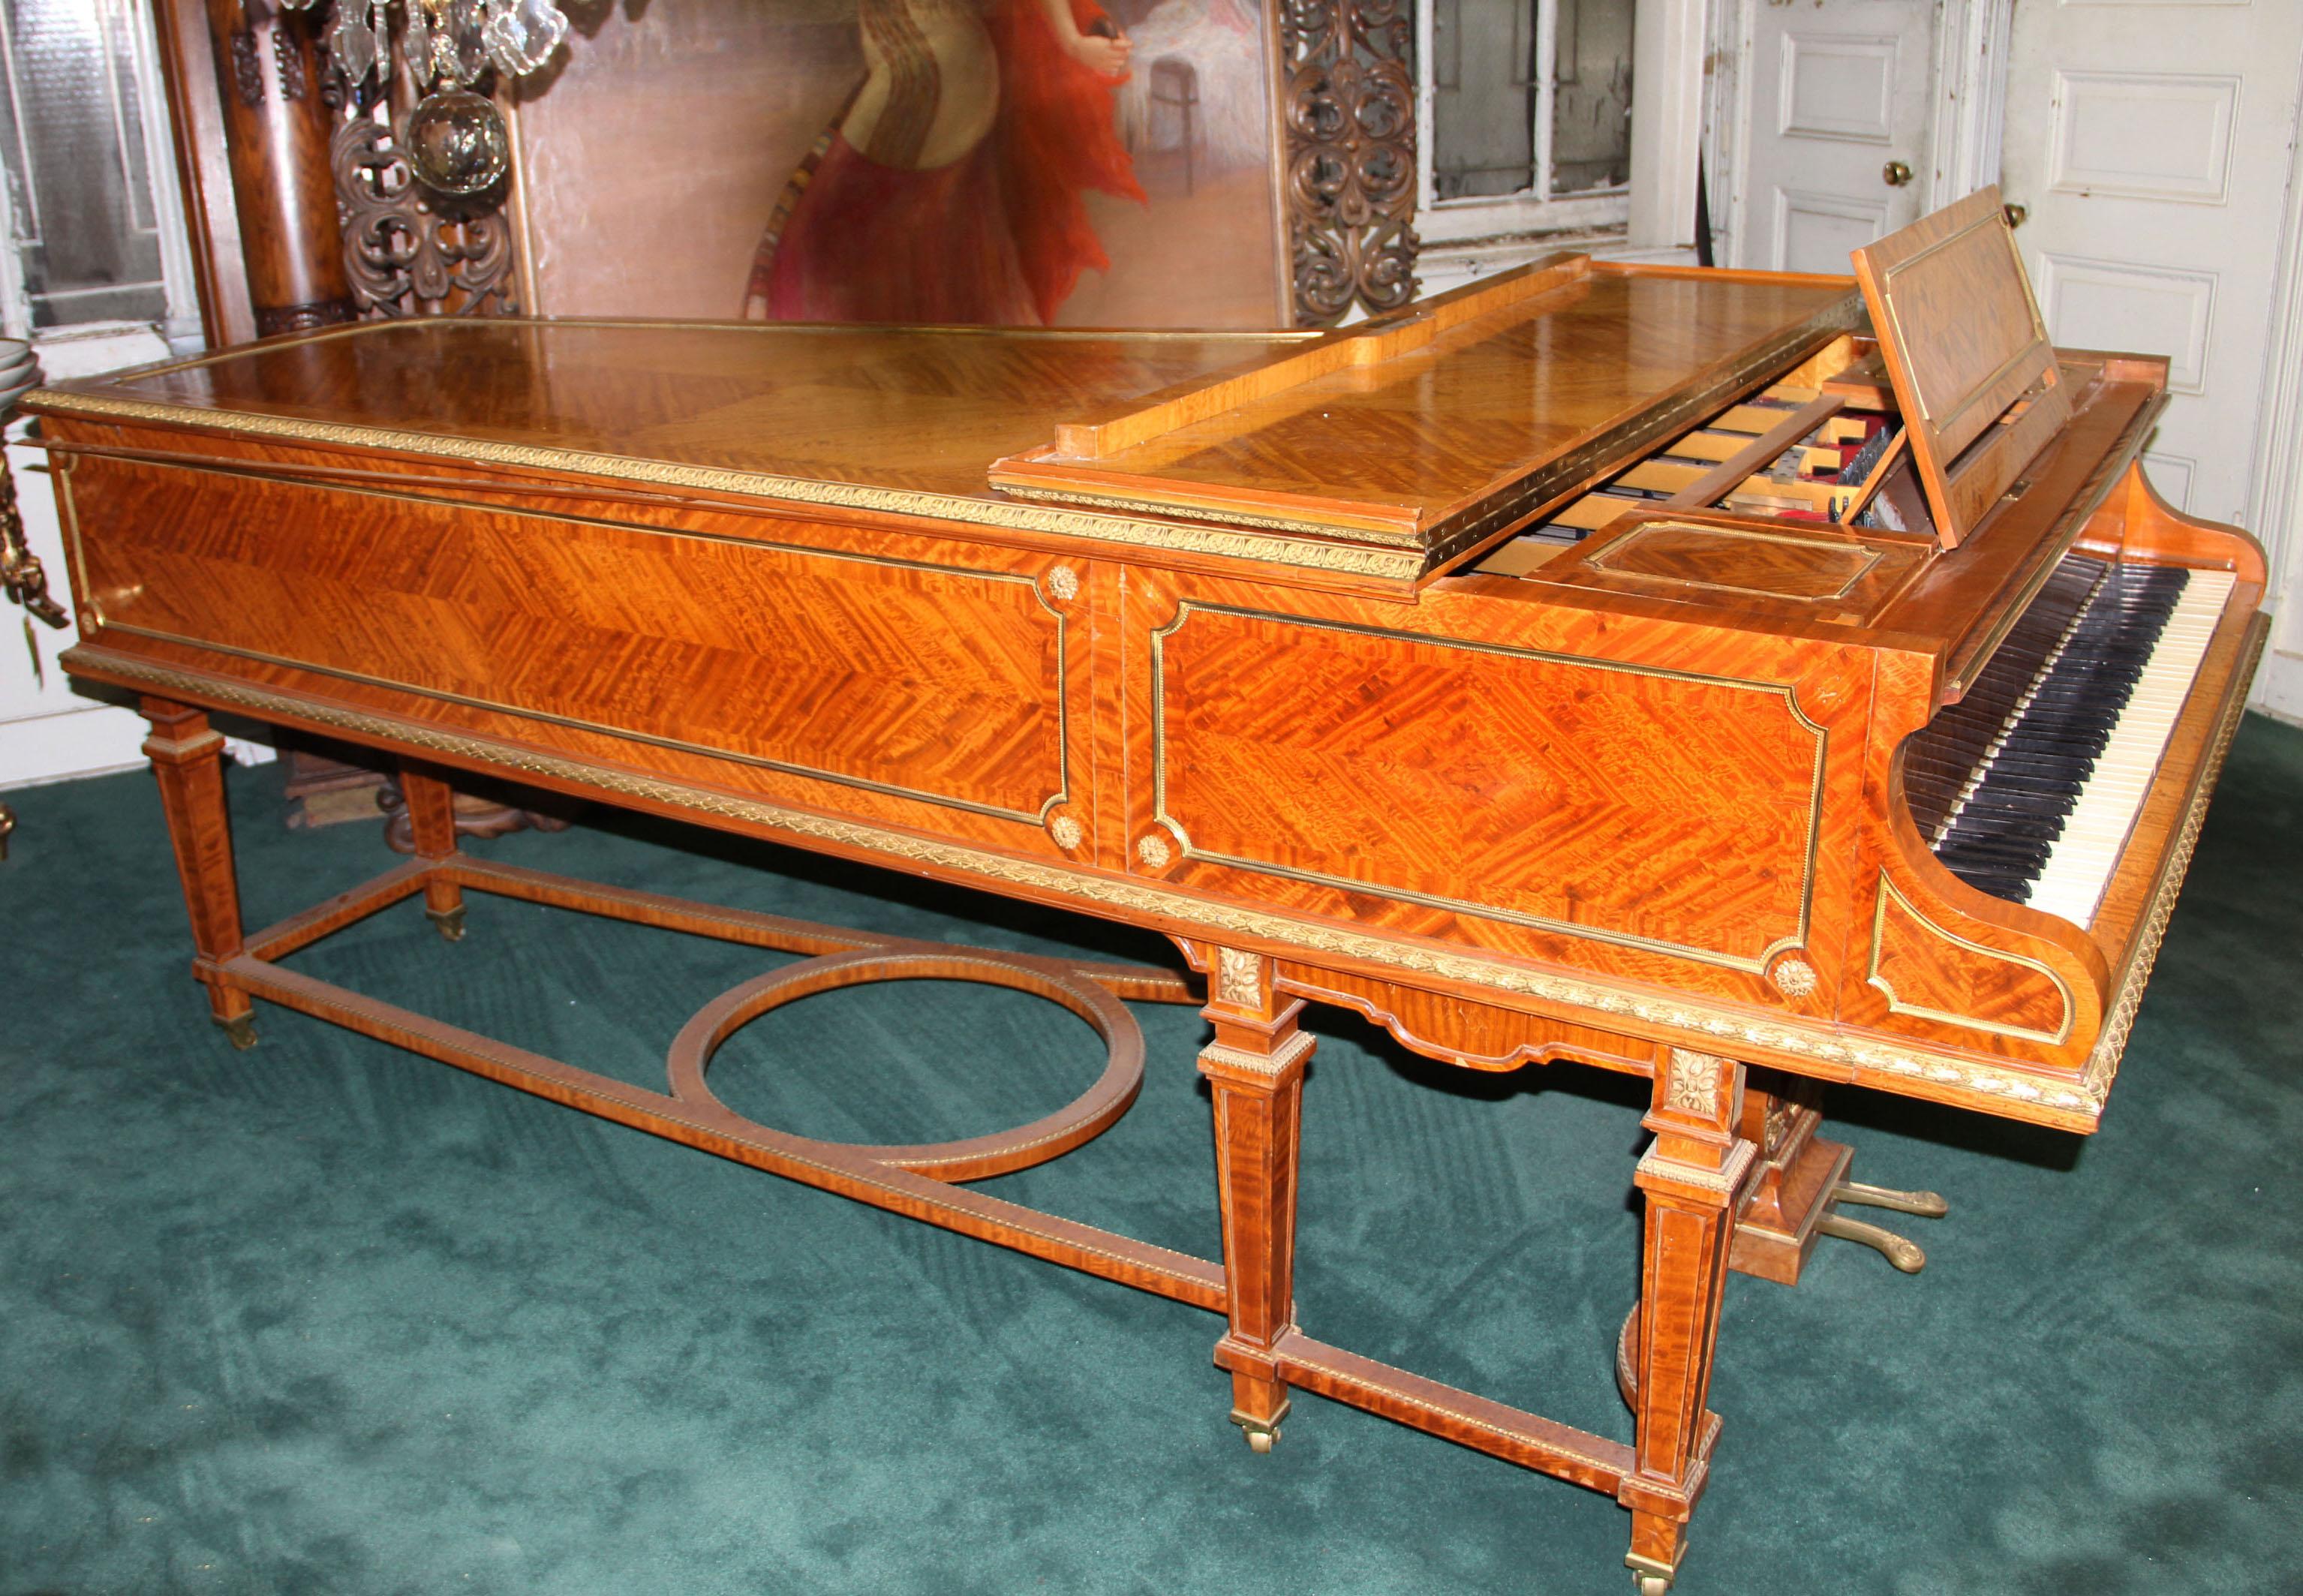 A wonderful turn of the century gilt bronze mounted Louis XVI style six-leg Grand Erard piano

Beautiful satinwood veneer, bronze mounts, standing on six legs centered by a stretcher.

The movement stamped with Erard serial number 93712 and